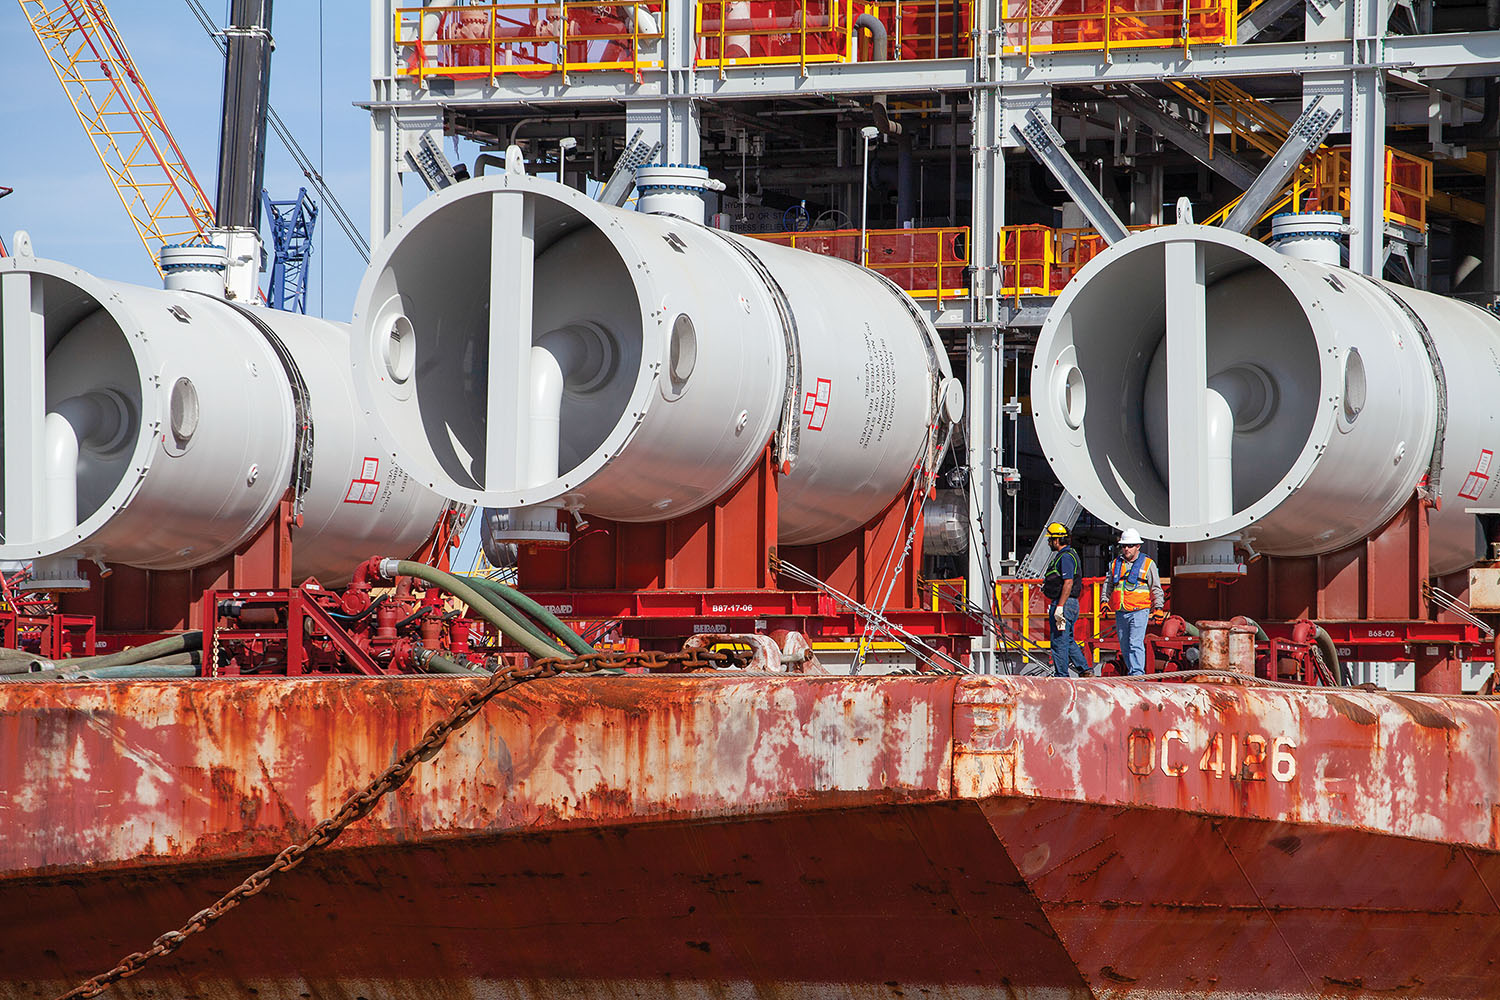 Components bound for Venture Global’s LNG export facility project on the Mississippi River in Plaquemines Parish, La., are loaded onto a barge in Morgan City, La. (Photo by Frank McCormack)